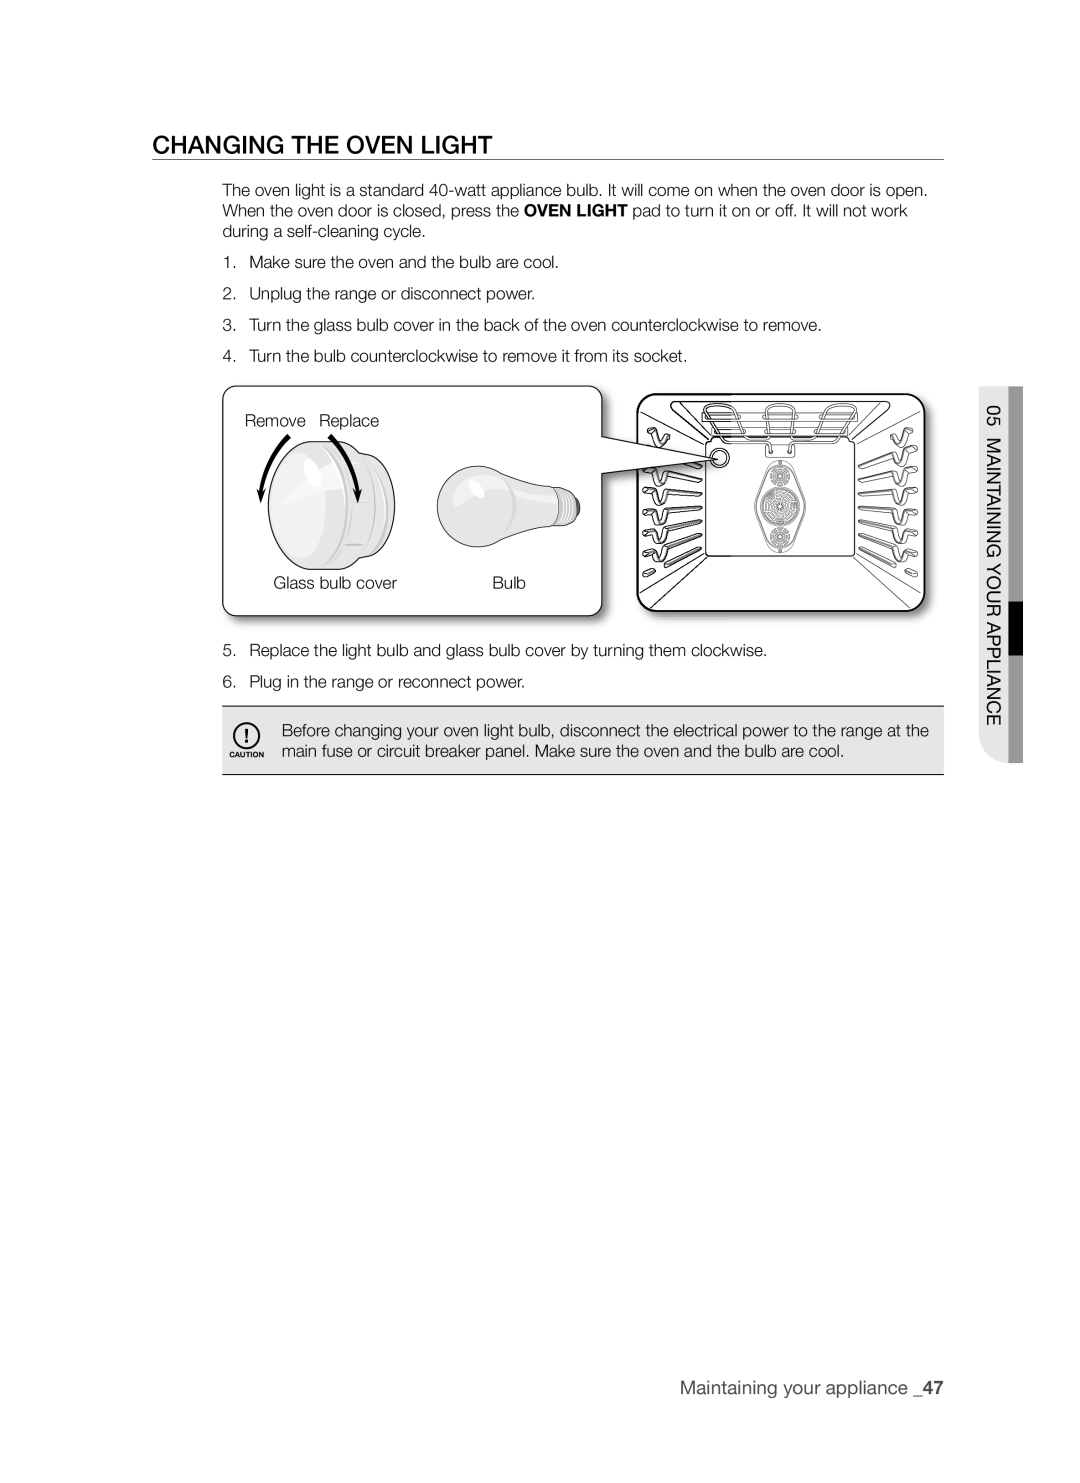 Samsung FTQ352IWB, FTQ352IWW user manual Changing The Oven Light, Maintaining Your Appliance, Maintaining your appliance _ 